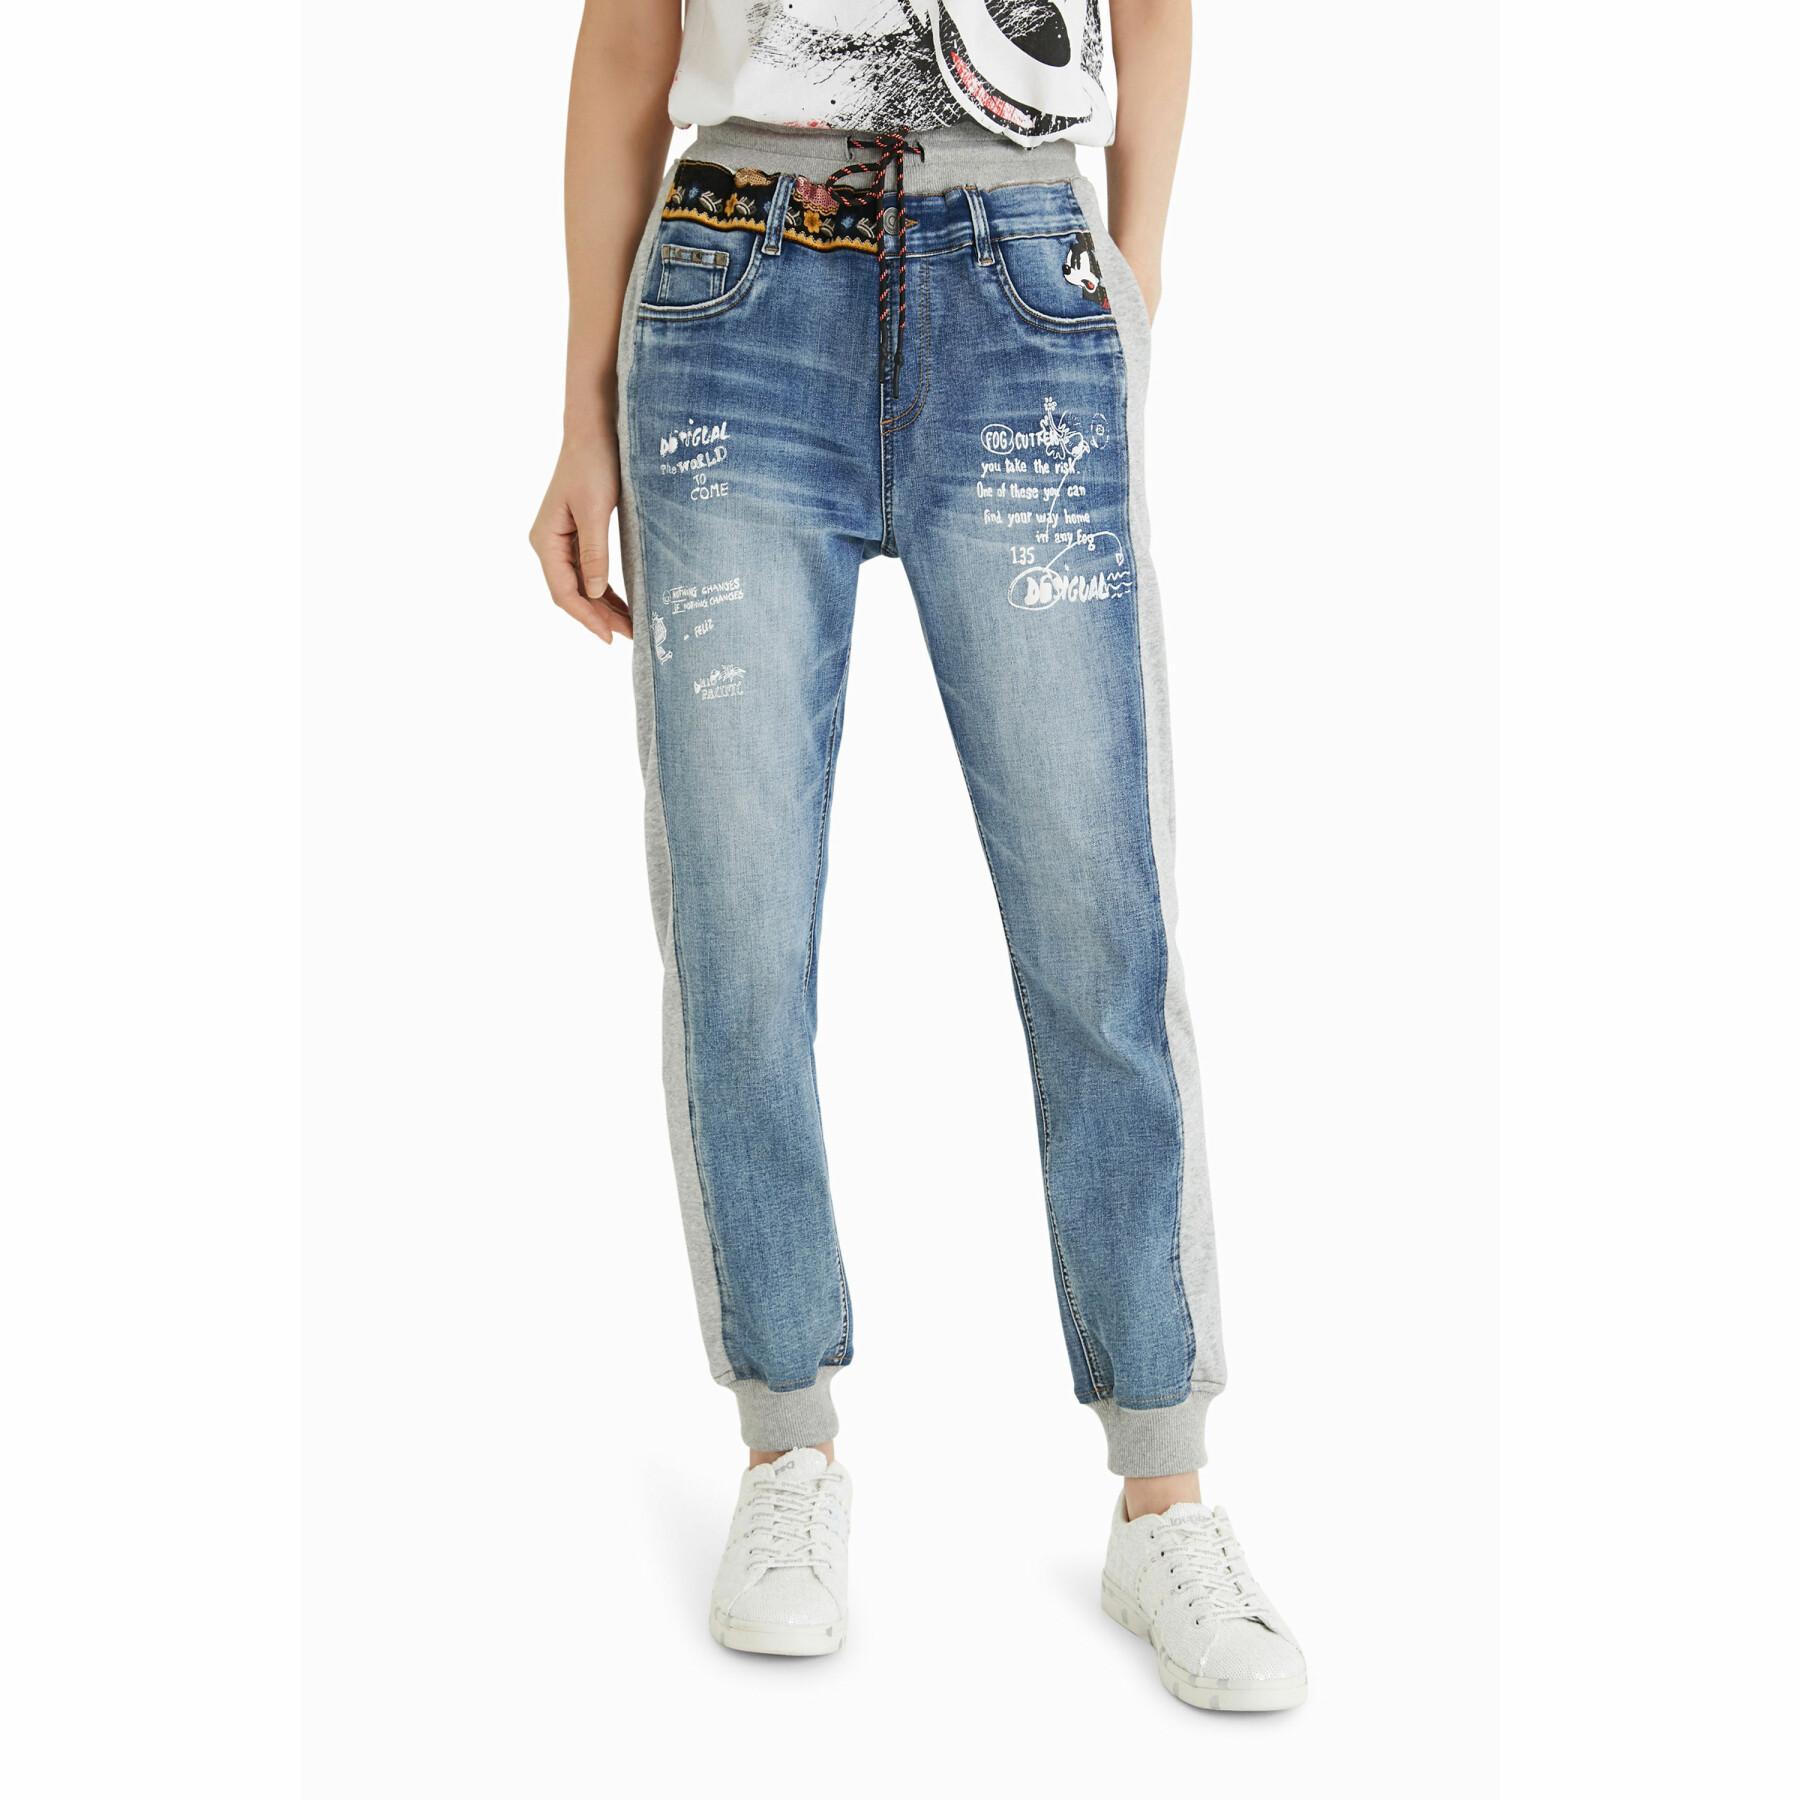 Onbeleefd een experiment doen Wat leuk Women's jeans Desigual Mickey Hybrid - Trousers and Jeans - Woman -  Lifestyle